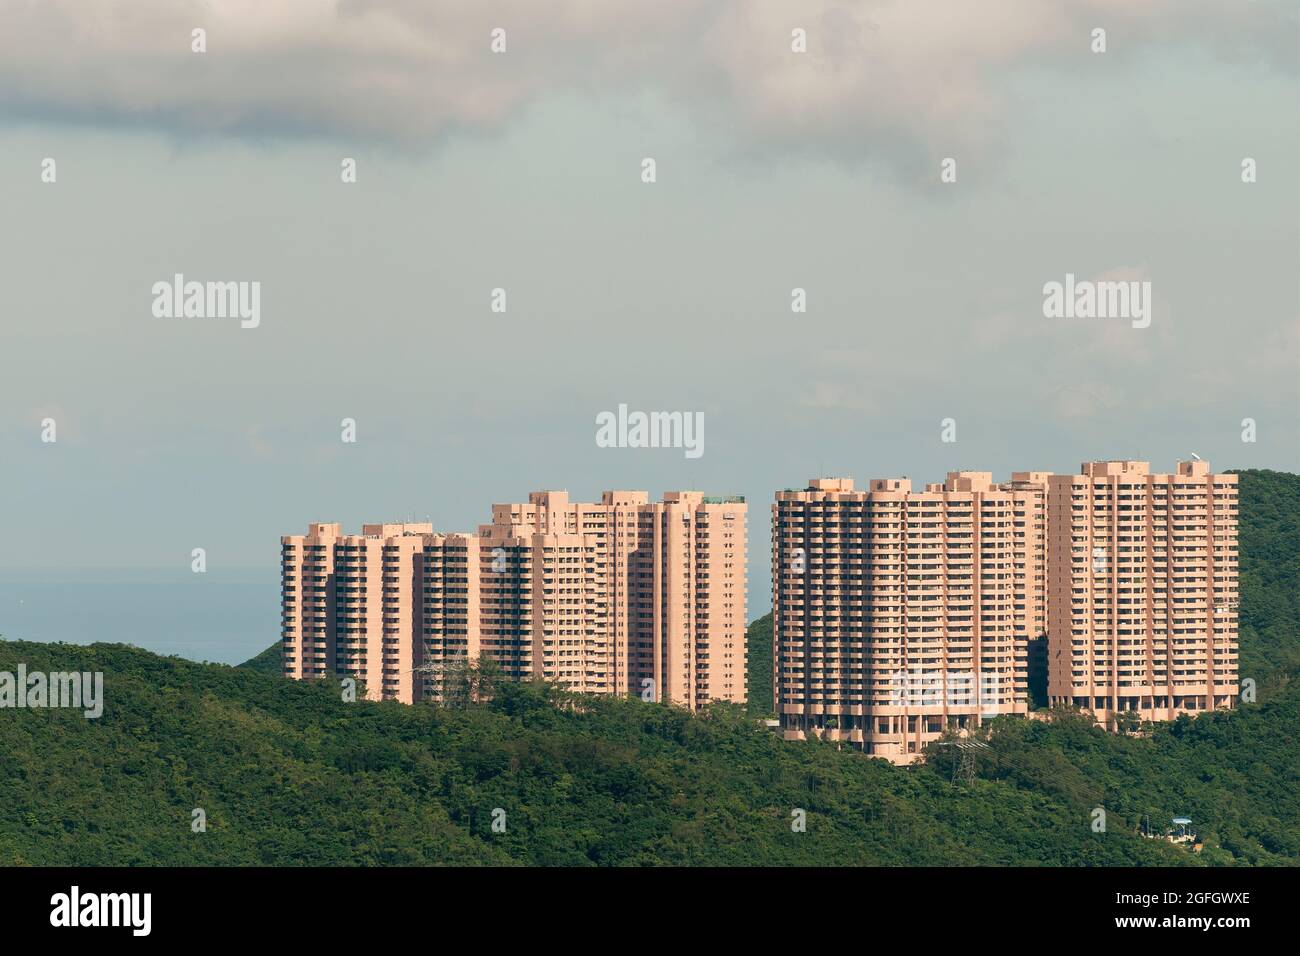 Hong Kong Parkview, a development of 18 20-storey residential apartment blocks in Tai Tam, from the roof of 2ifc, Hong Kong Island's tallest building Stock Photo